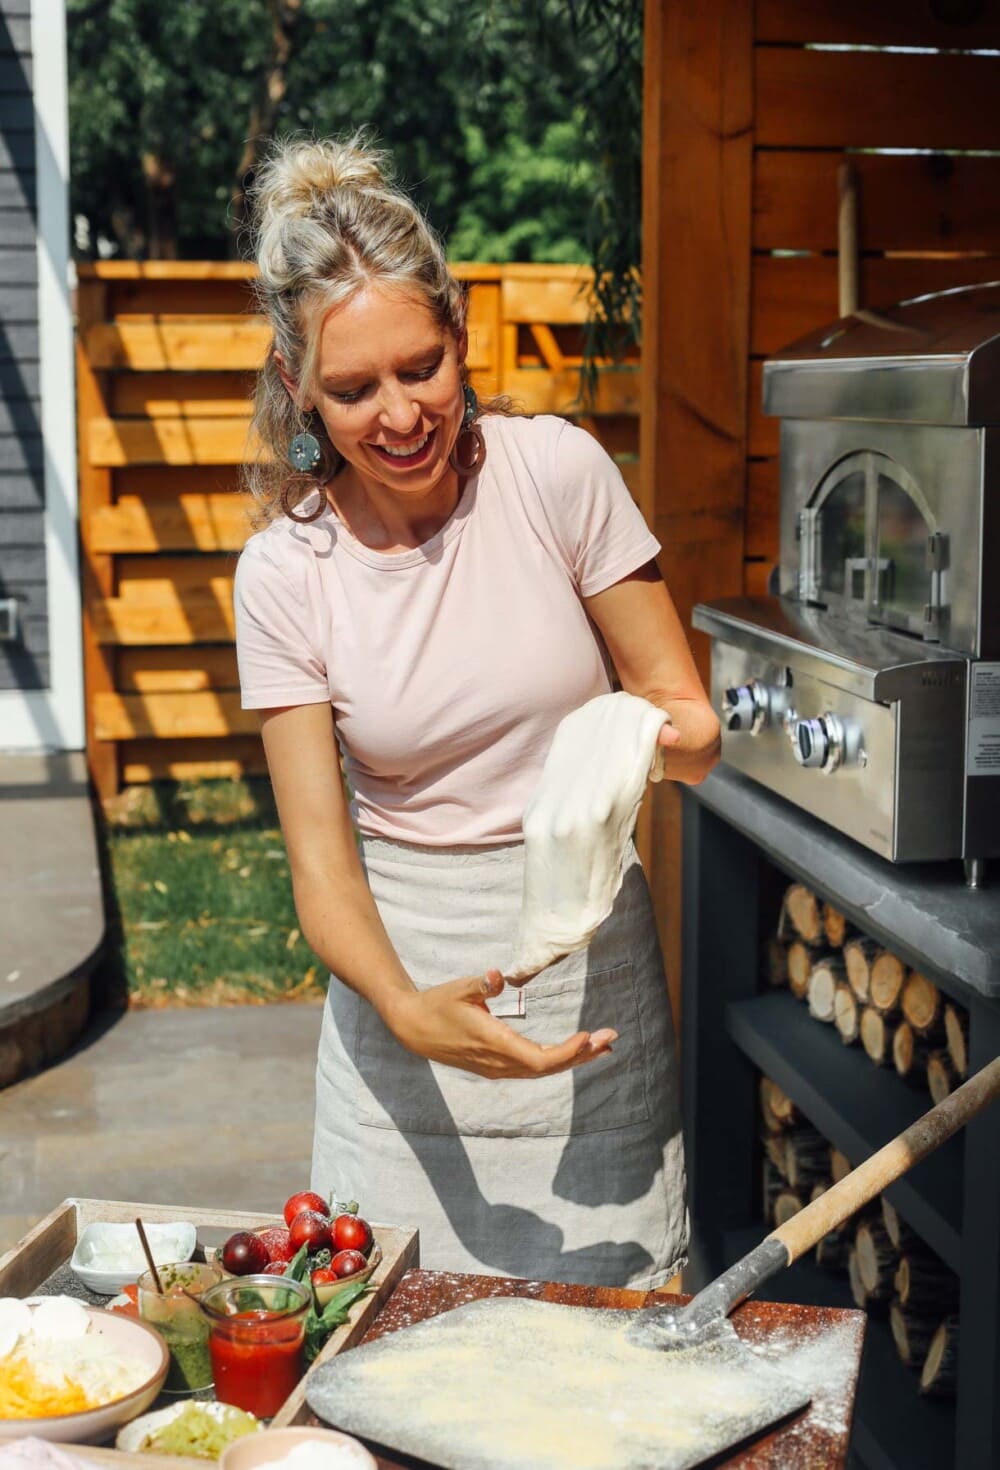 blonde woman tossing pizza dough outside